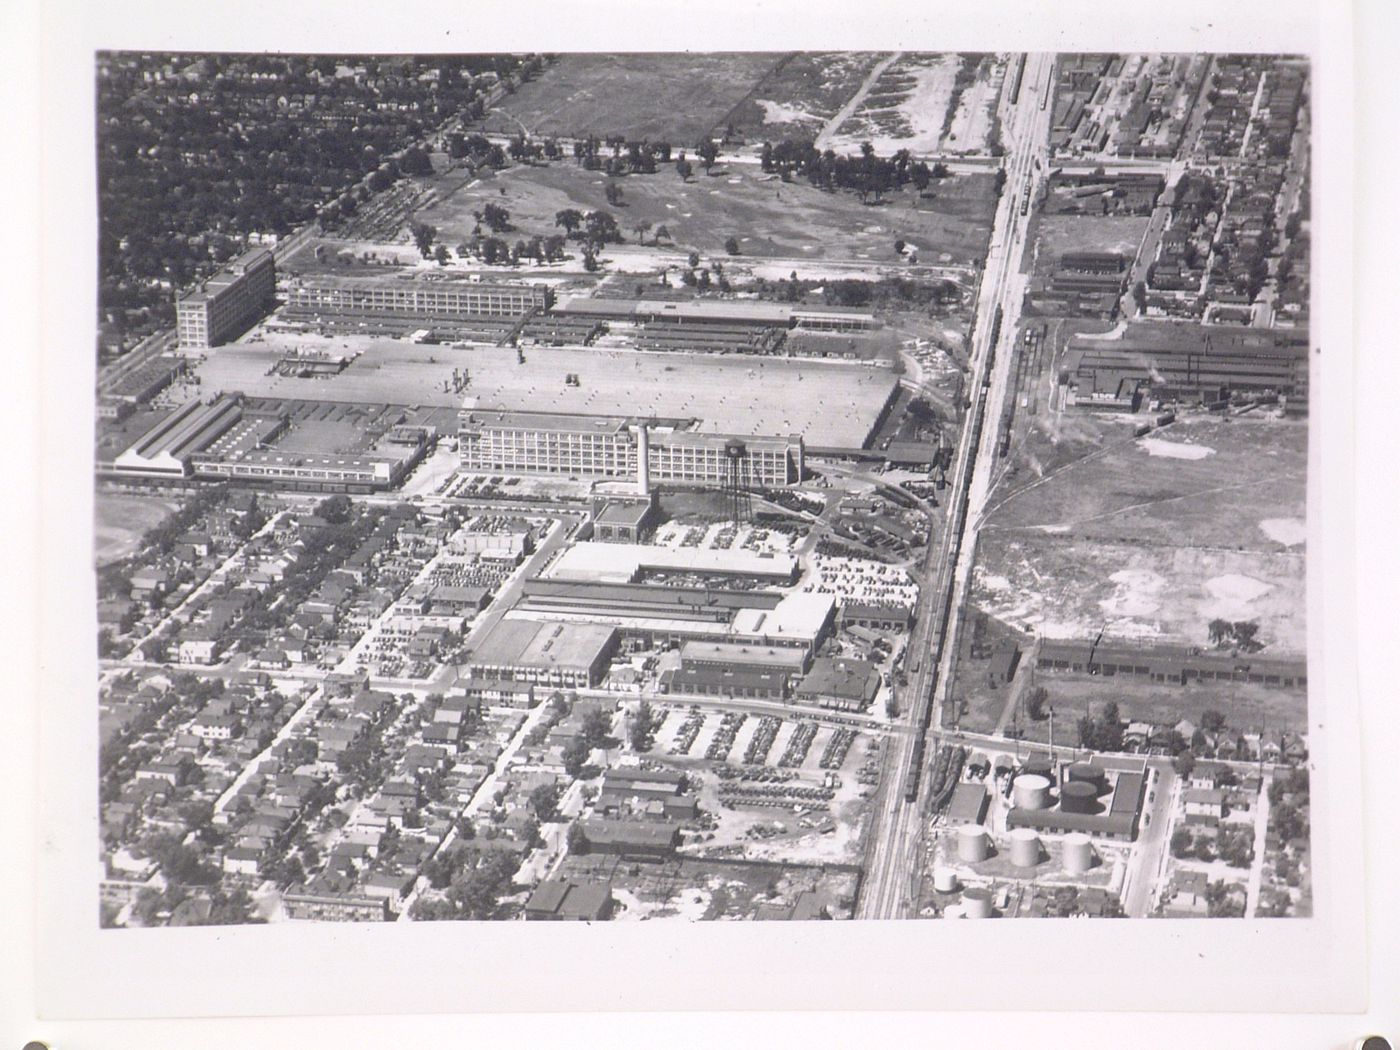 Aerial view of the Chrysler Corporation Highland Park Plant, Highland Park, Michigan